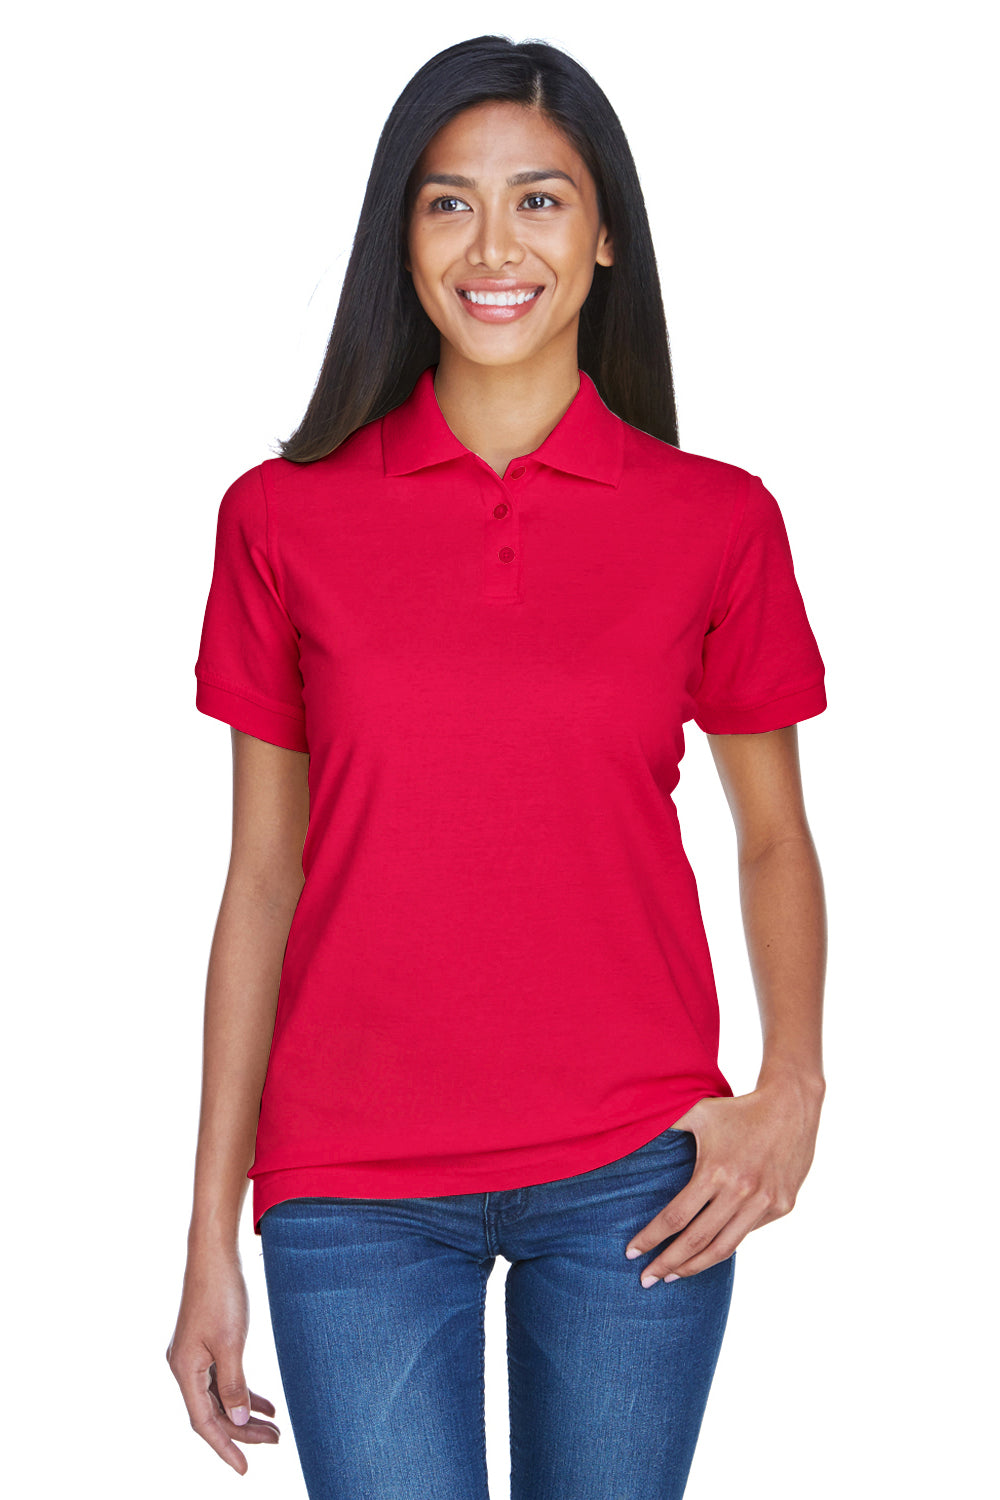 UltraClub 8530 Womens Classic Short Sleeve Polo Shirt Red Front